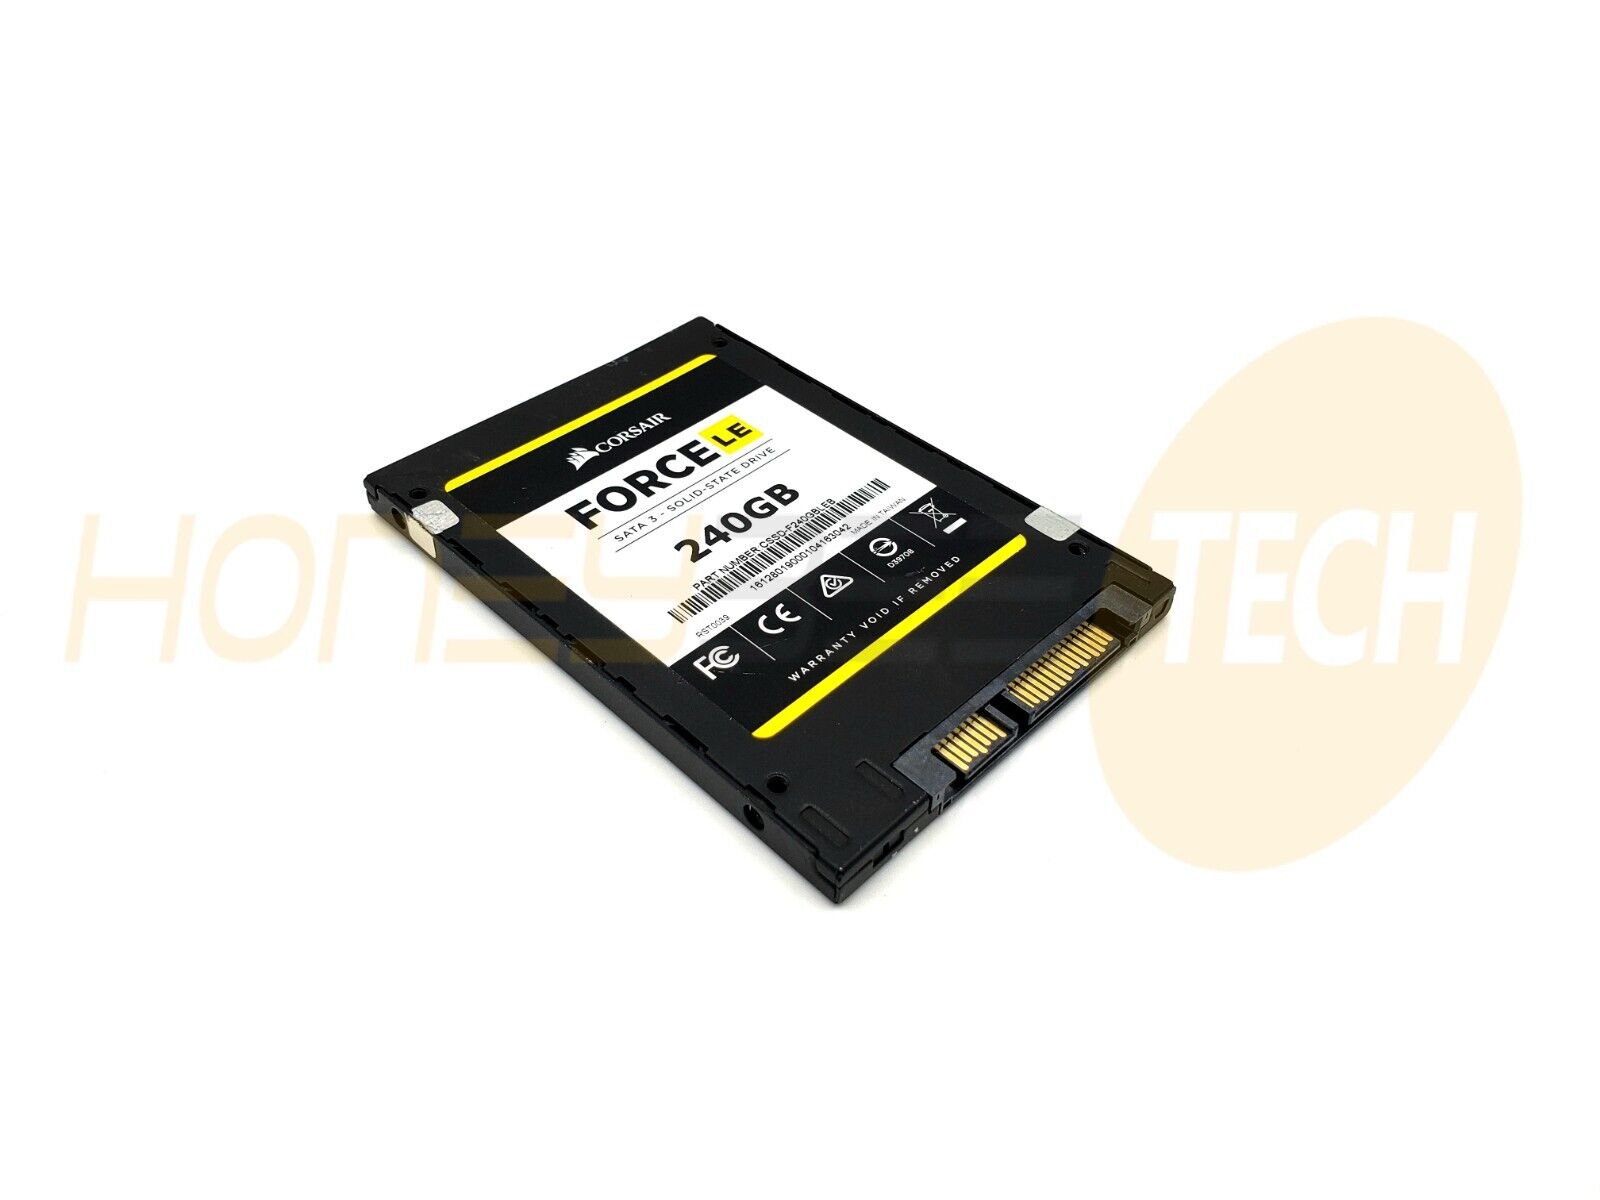 GENUINE CORSAIR 240GB 2.5  SATA SSD 7MM SOLID STATE DRIVE CSSD-F240GBLEB TESTED